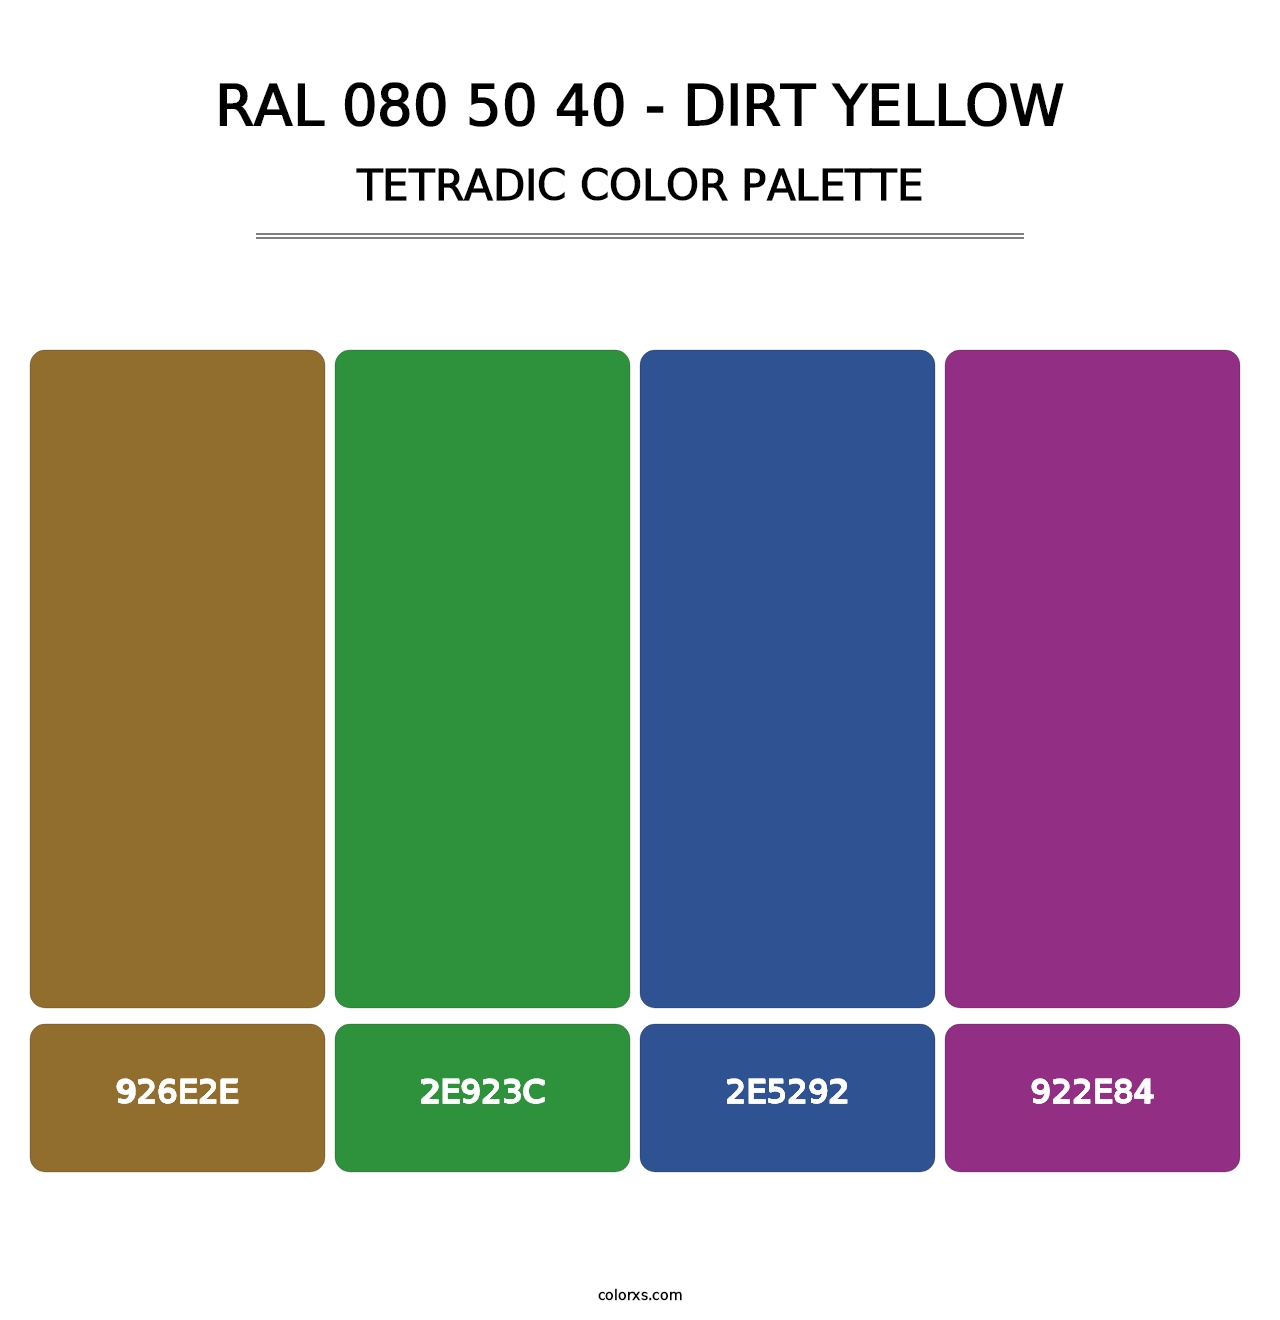 RAL 080 50 40 - Dirt Yellow - Tetradic Color Palette